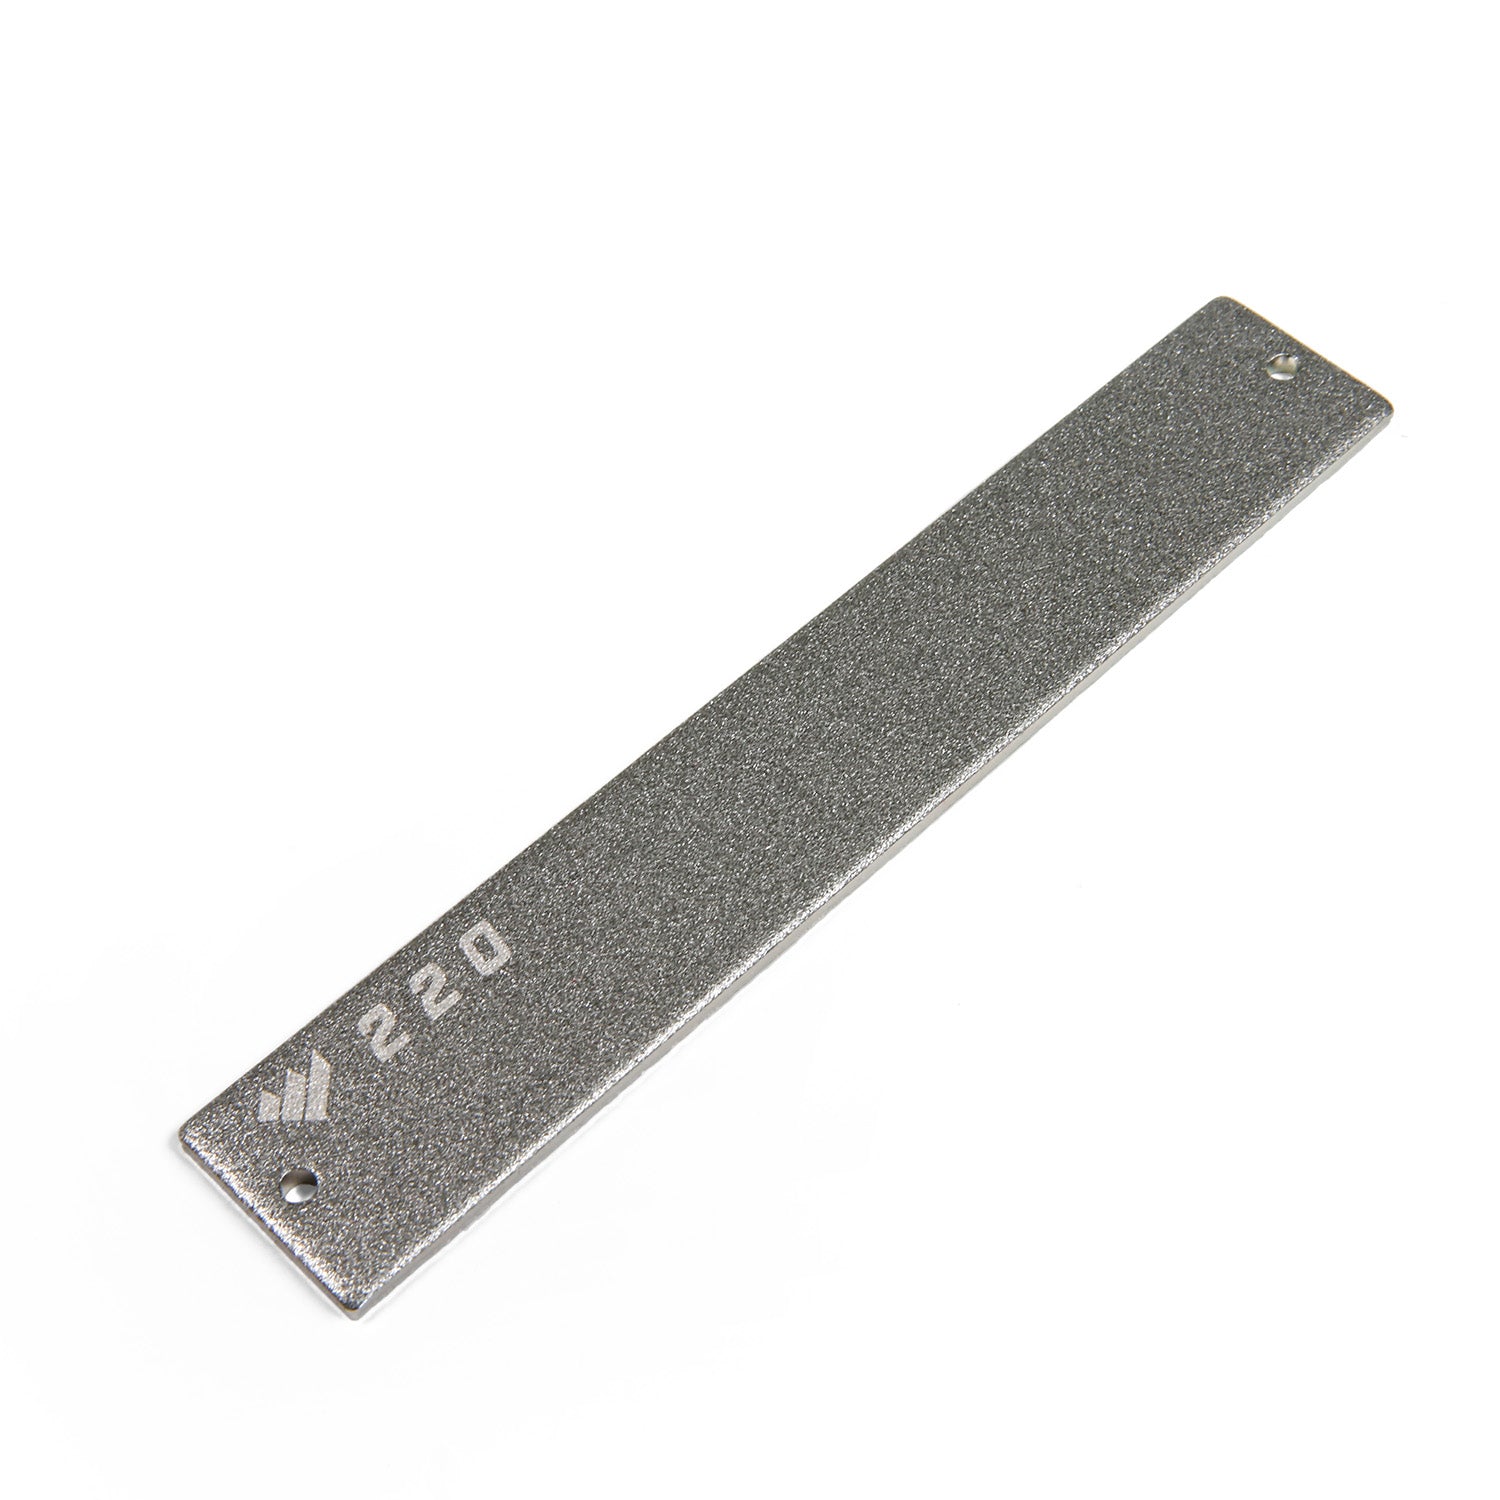 Replacement 600 Grit Plate for the Precision Adjust™ - Work Sharp